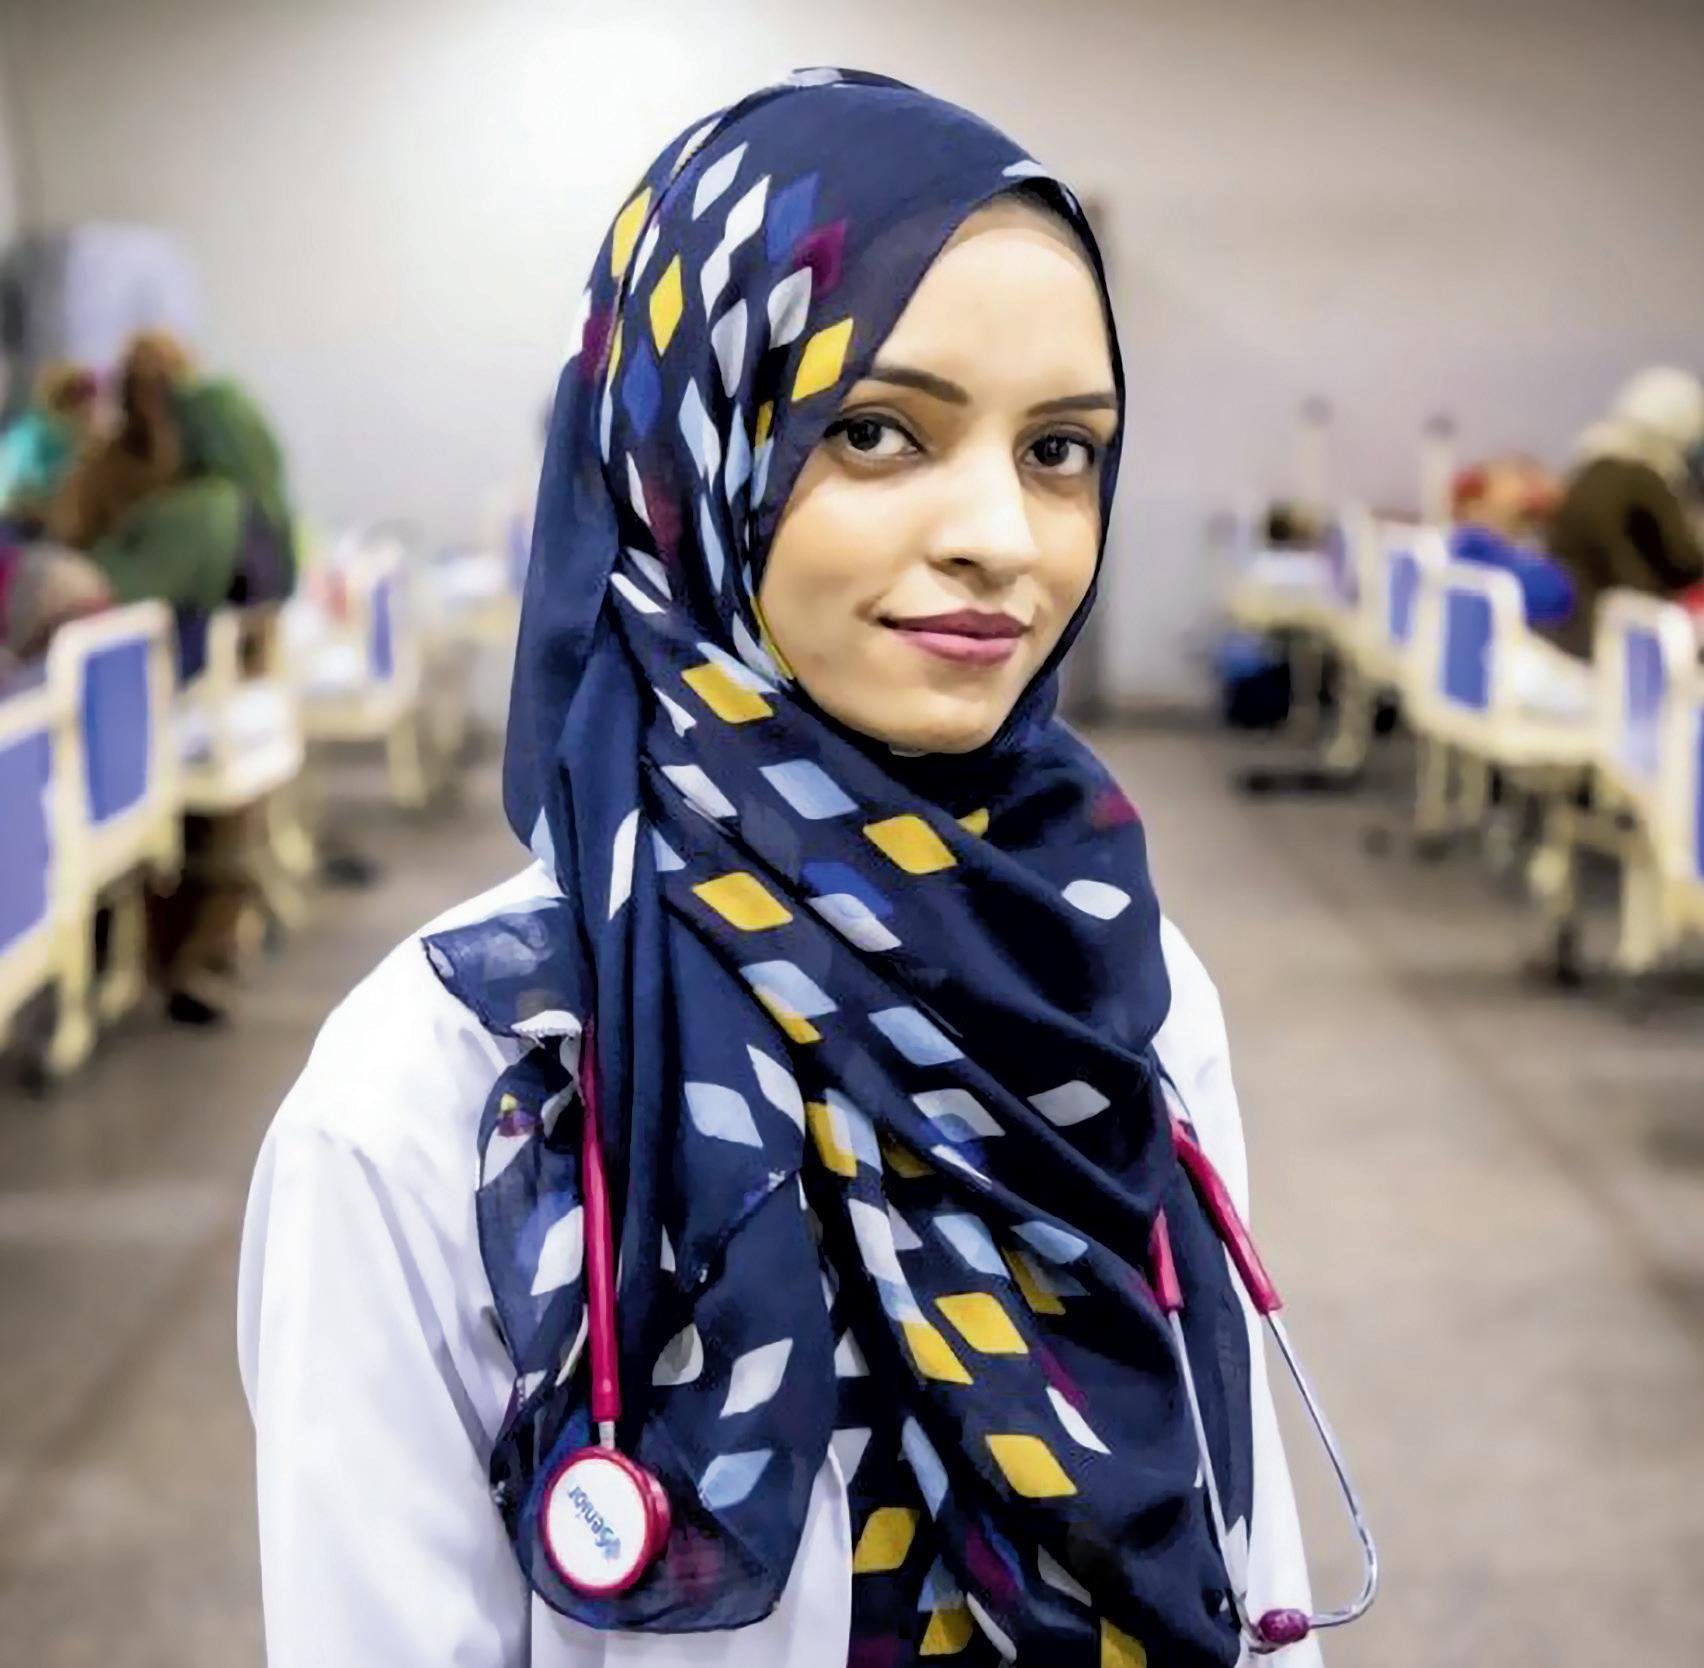 Afghan Refugee Doctor Dares Women and Girls to Dream - Issuu